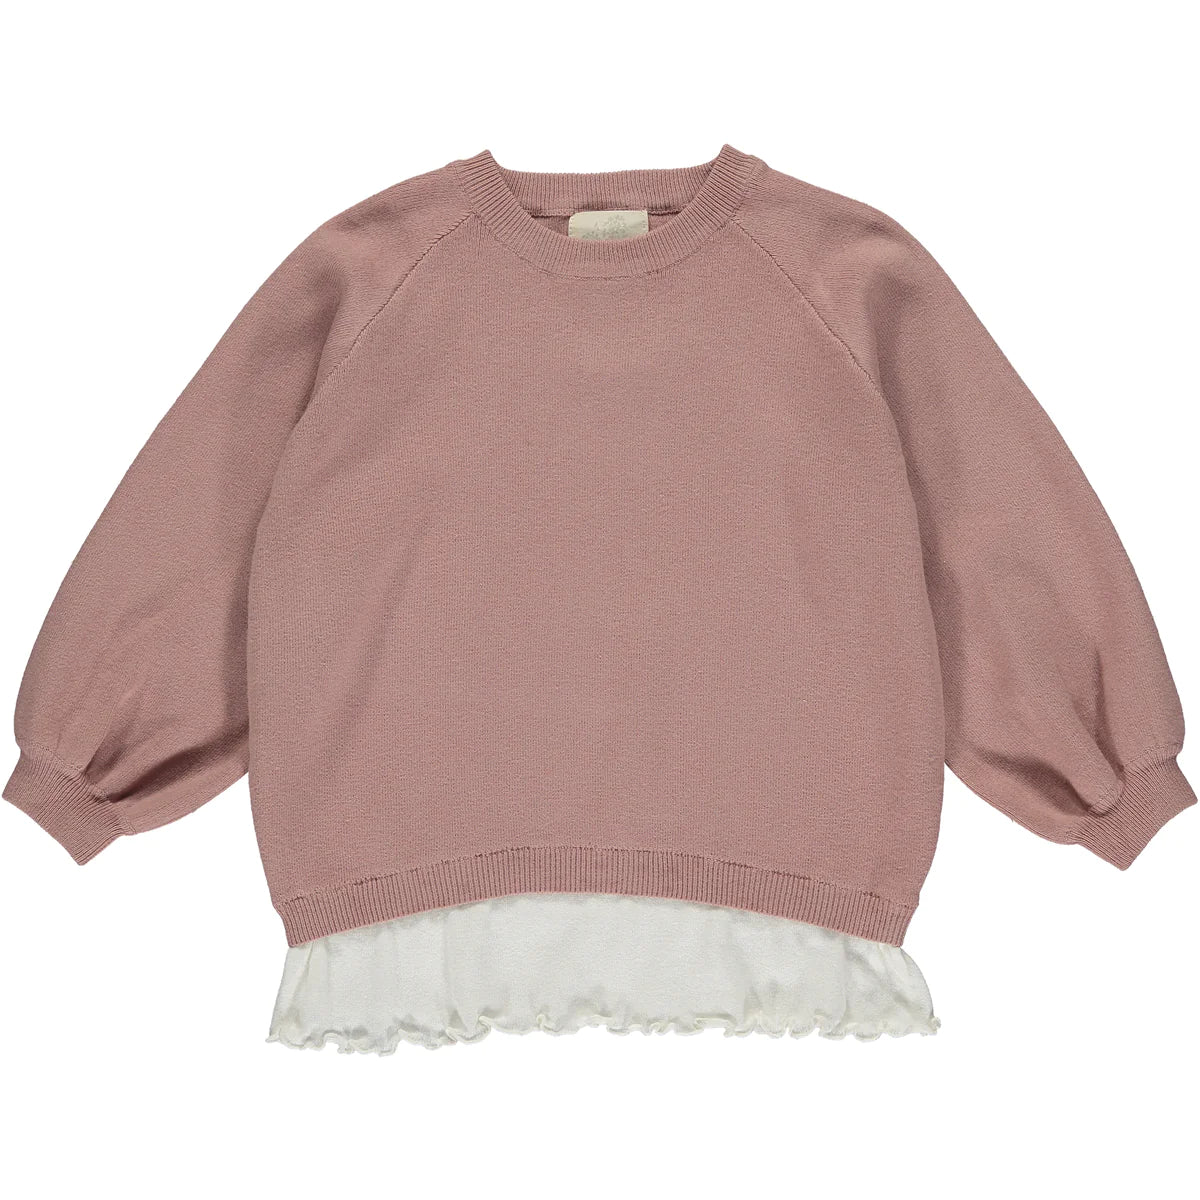 The Lavender Logan Sweater is the ultimate in cozy chic! With its ruffled frills and super-soft cotton fabric, this sweater feels like a hug and looks like a dream.